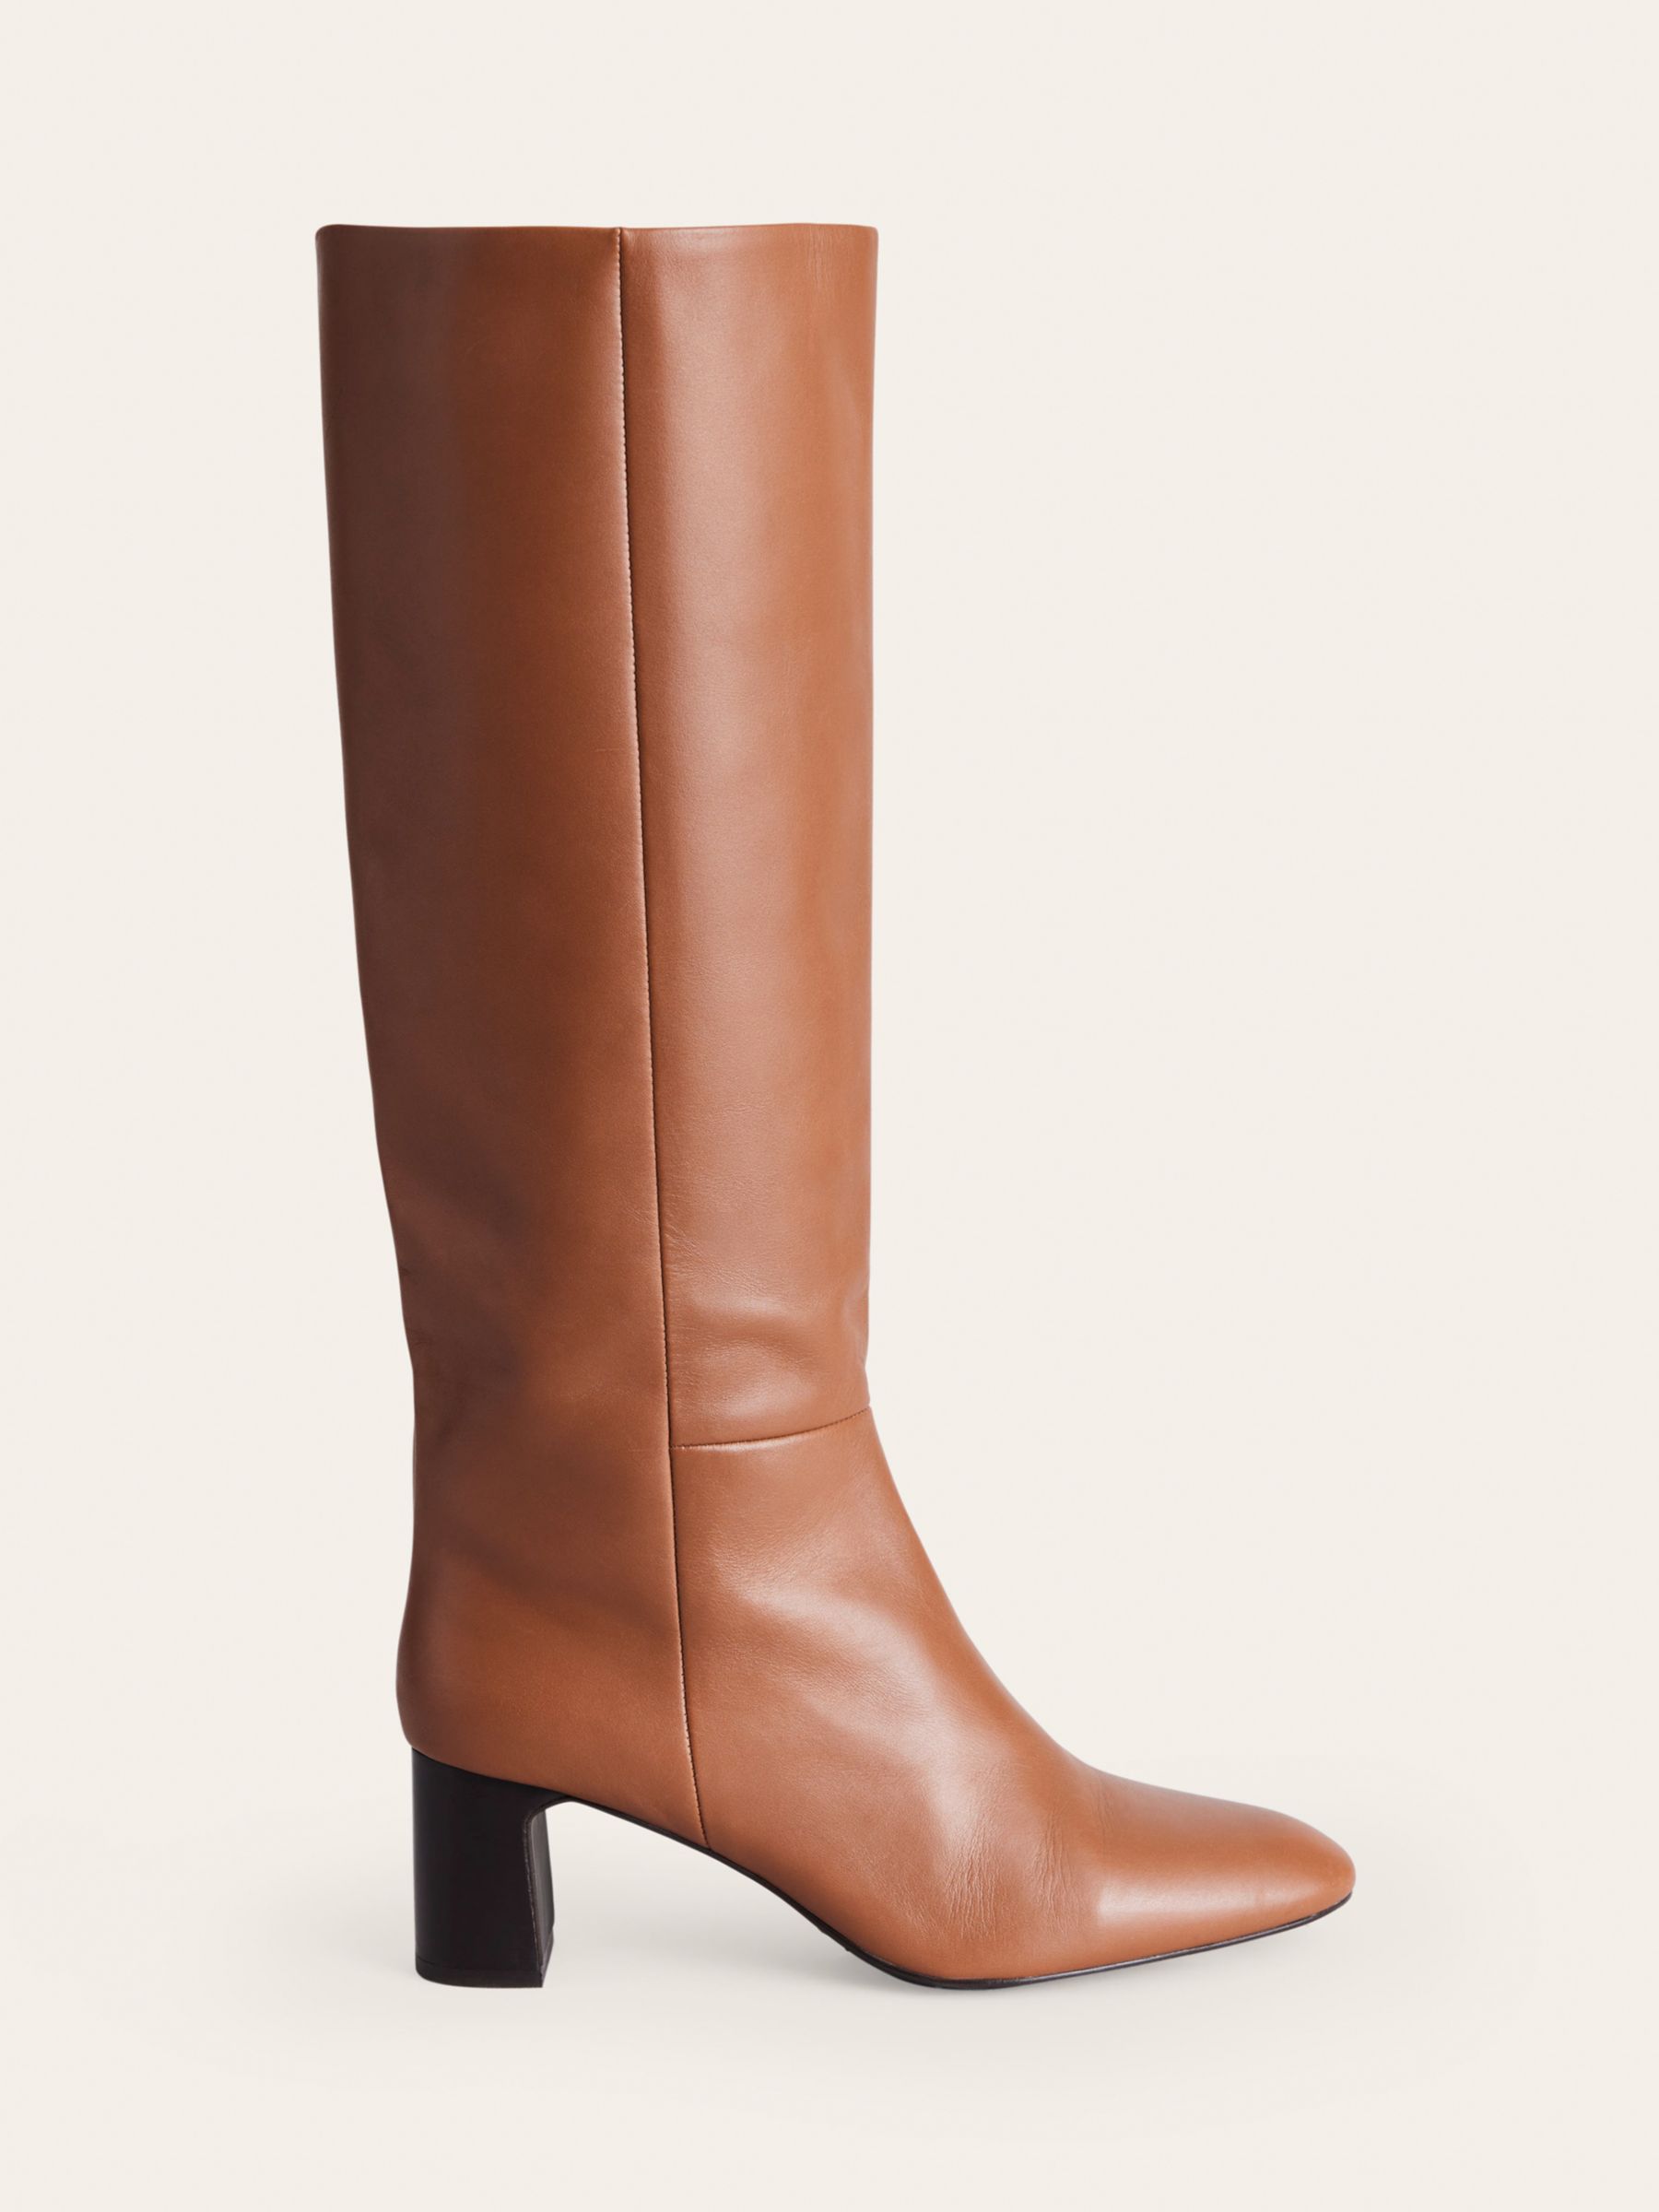 Boden Erica Knee High Leather Boots, Tan at John Lewis & Partners